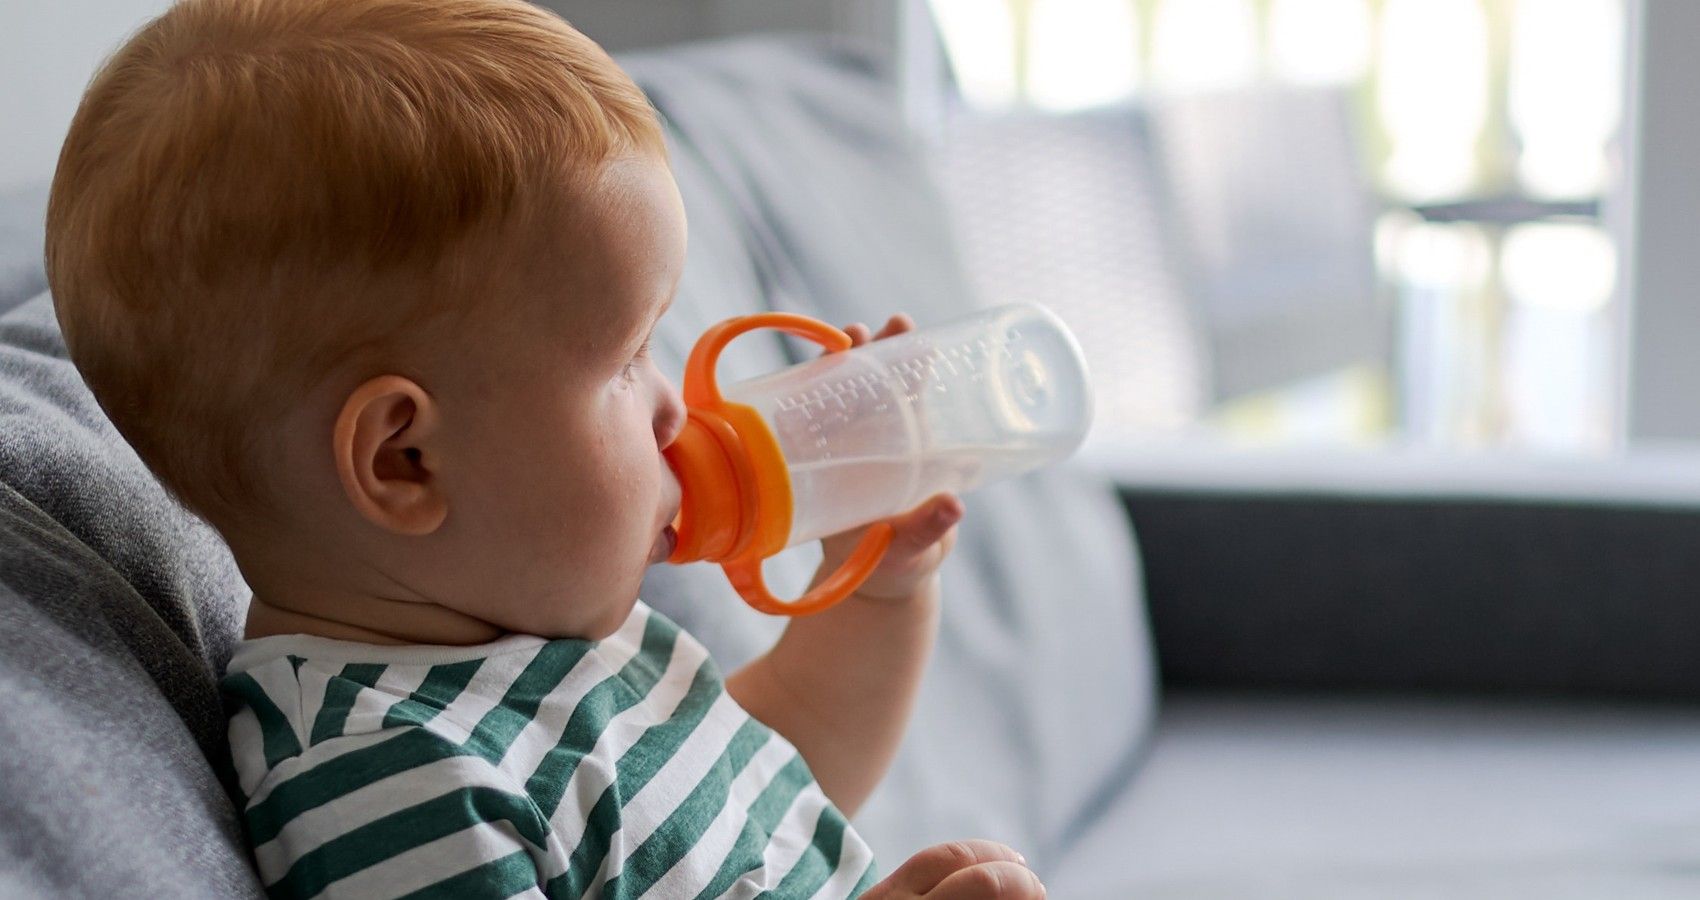 Introducing Juice To Babies Could Increase Obesity Risk